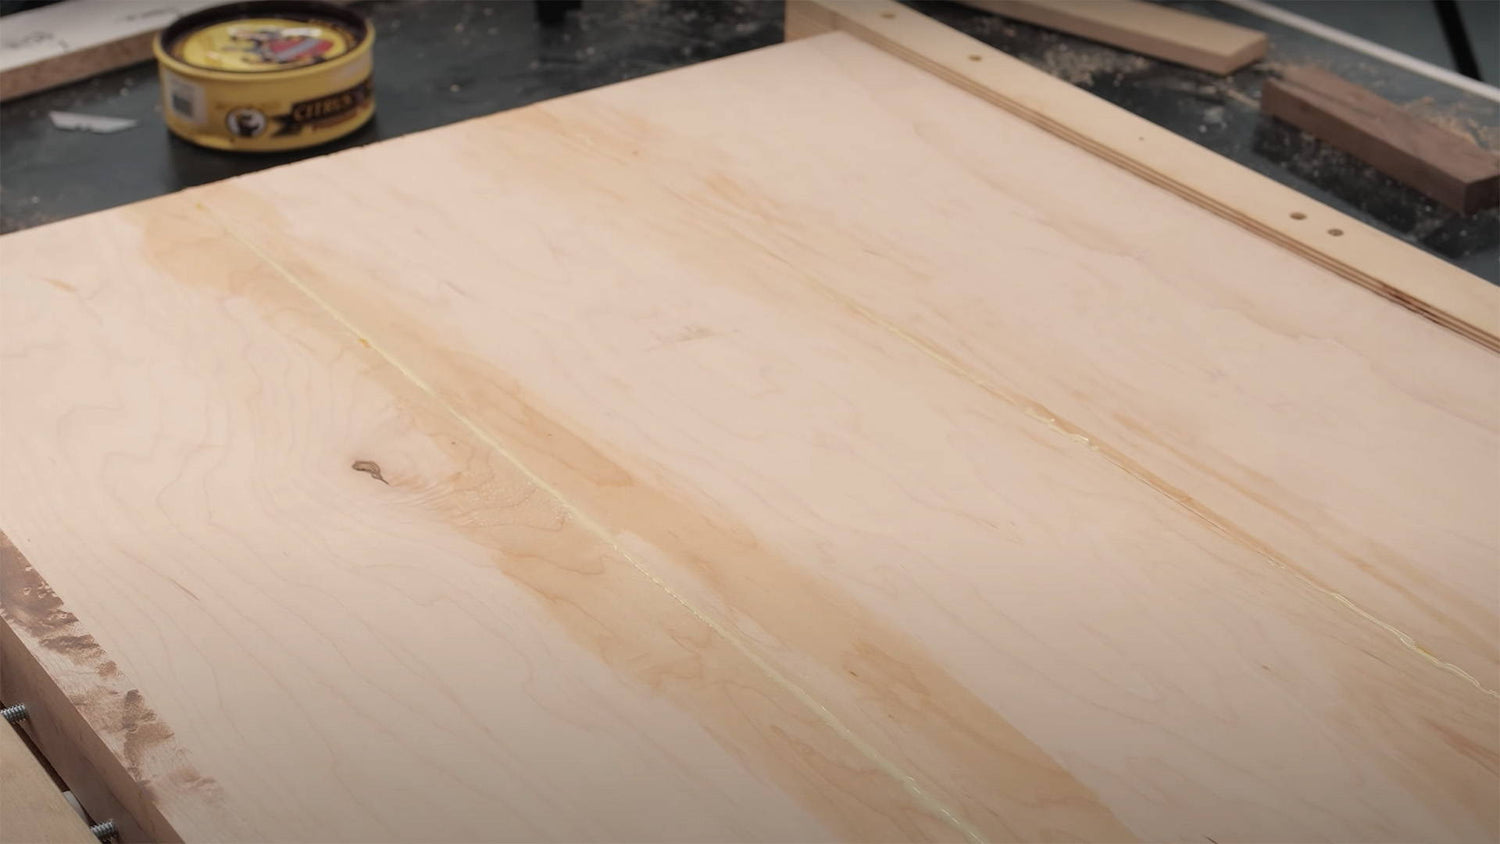 9 Tips for Better Panel Glue-Ups: The Key to Flat Tabletops